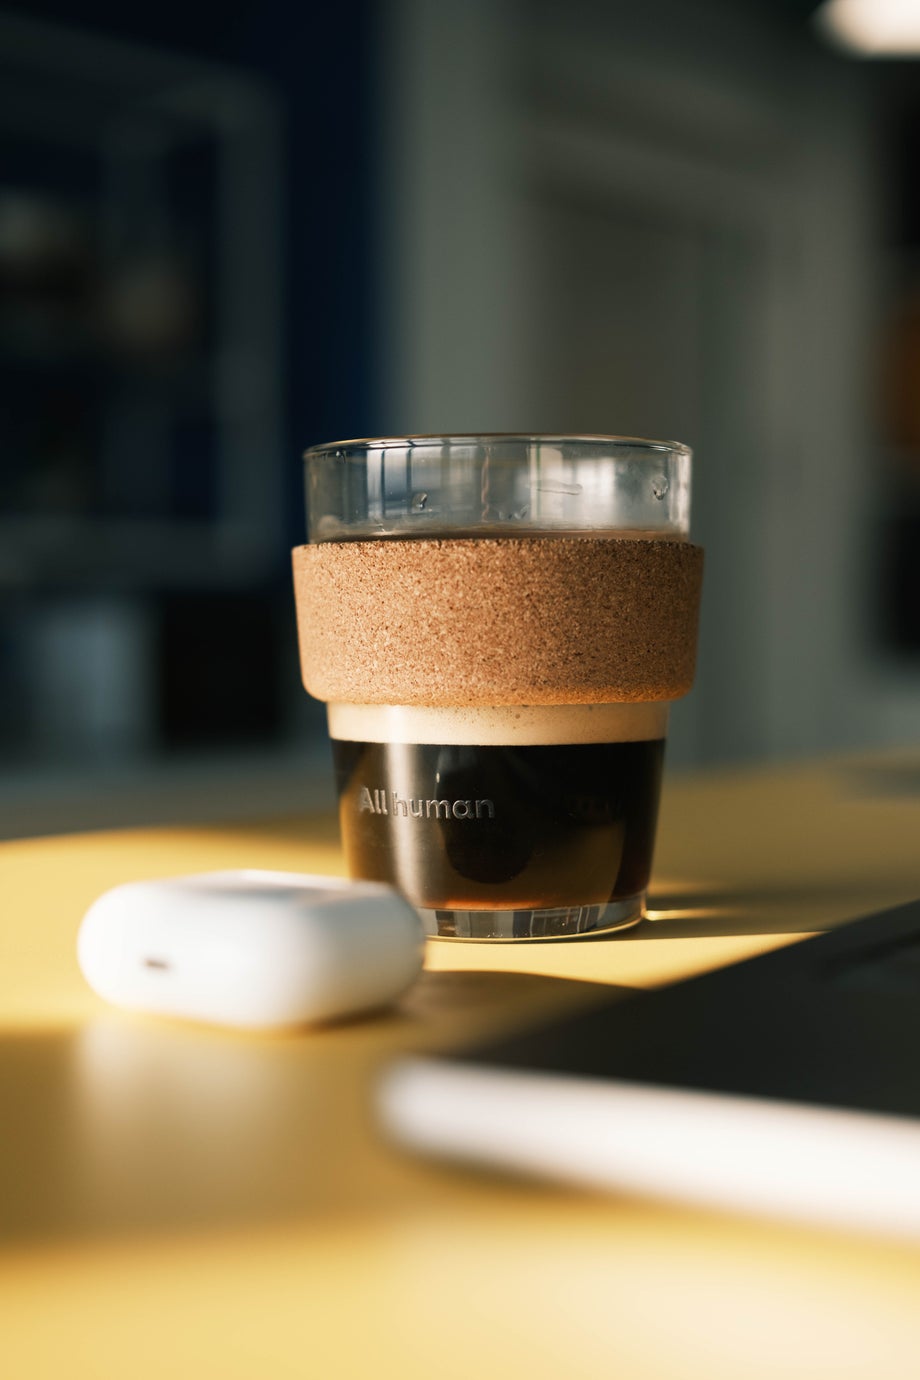 An All human branded coffee cup sits on a desk